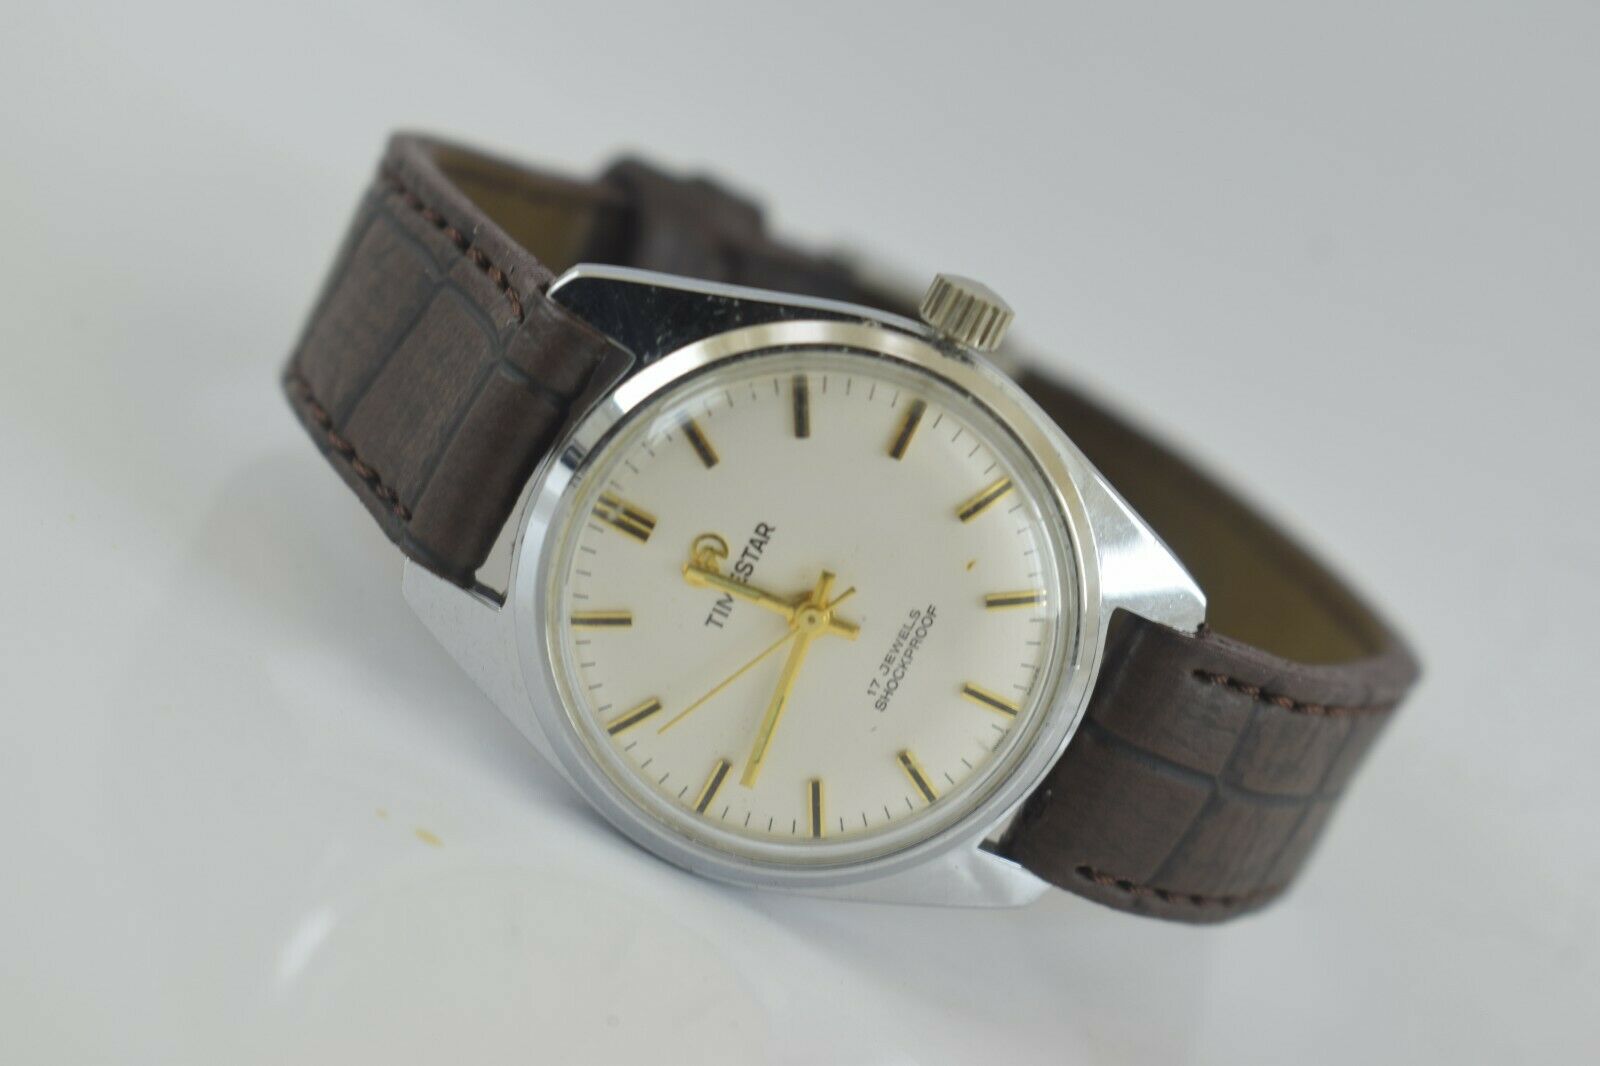 New Old Stock 23k Gold Plated Timestar Quartz Bracelet Watch With Free  Shipping USA - Etsy